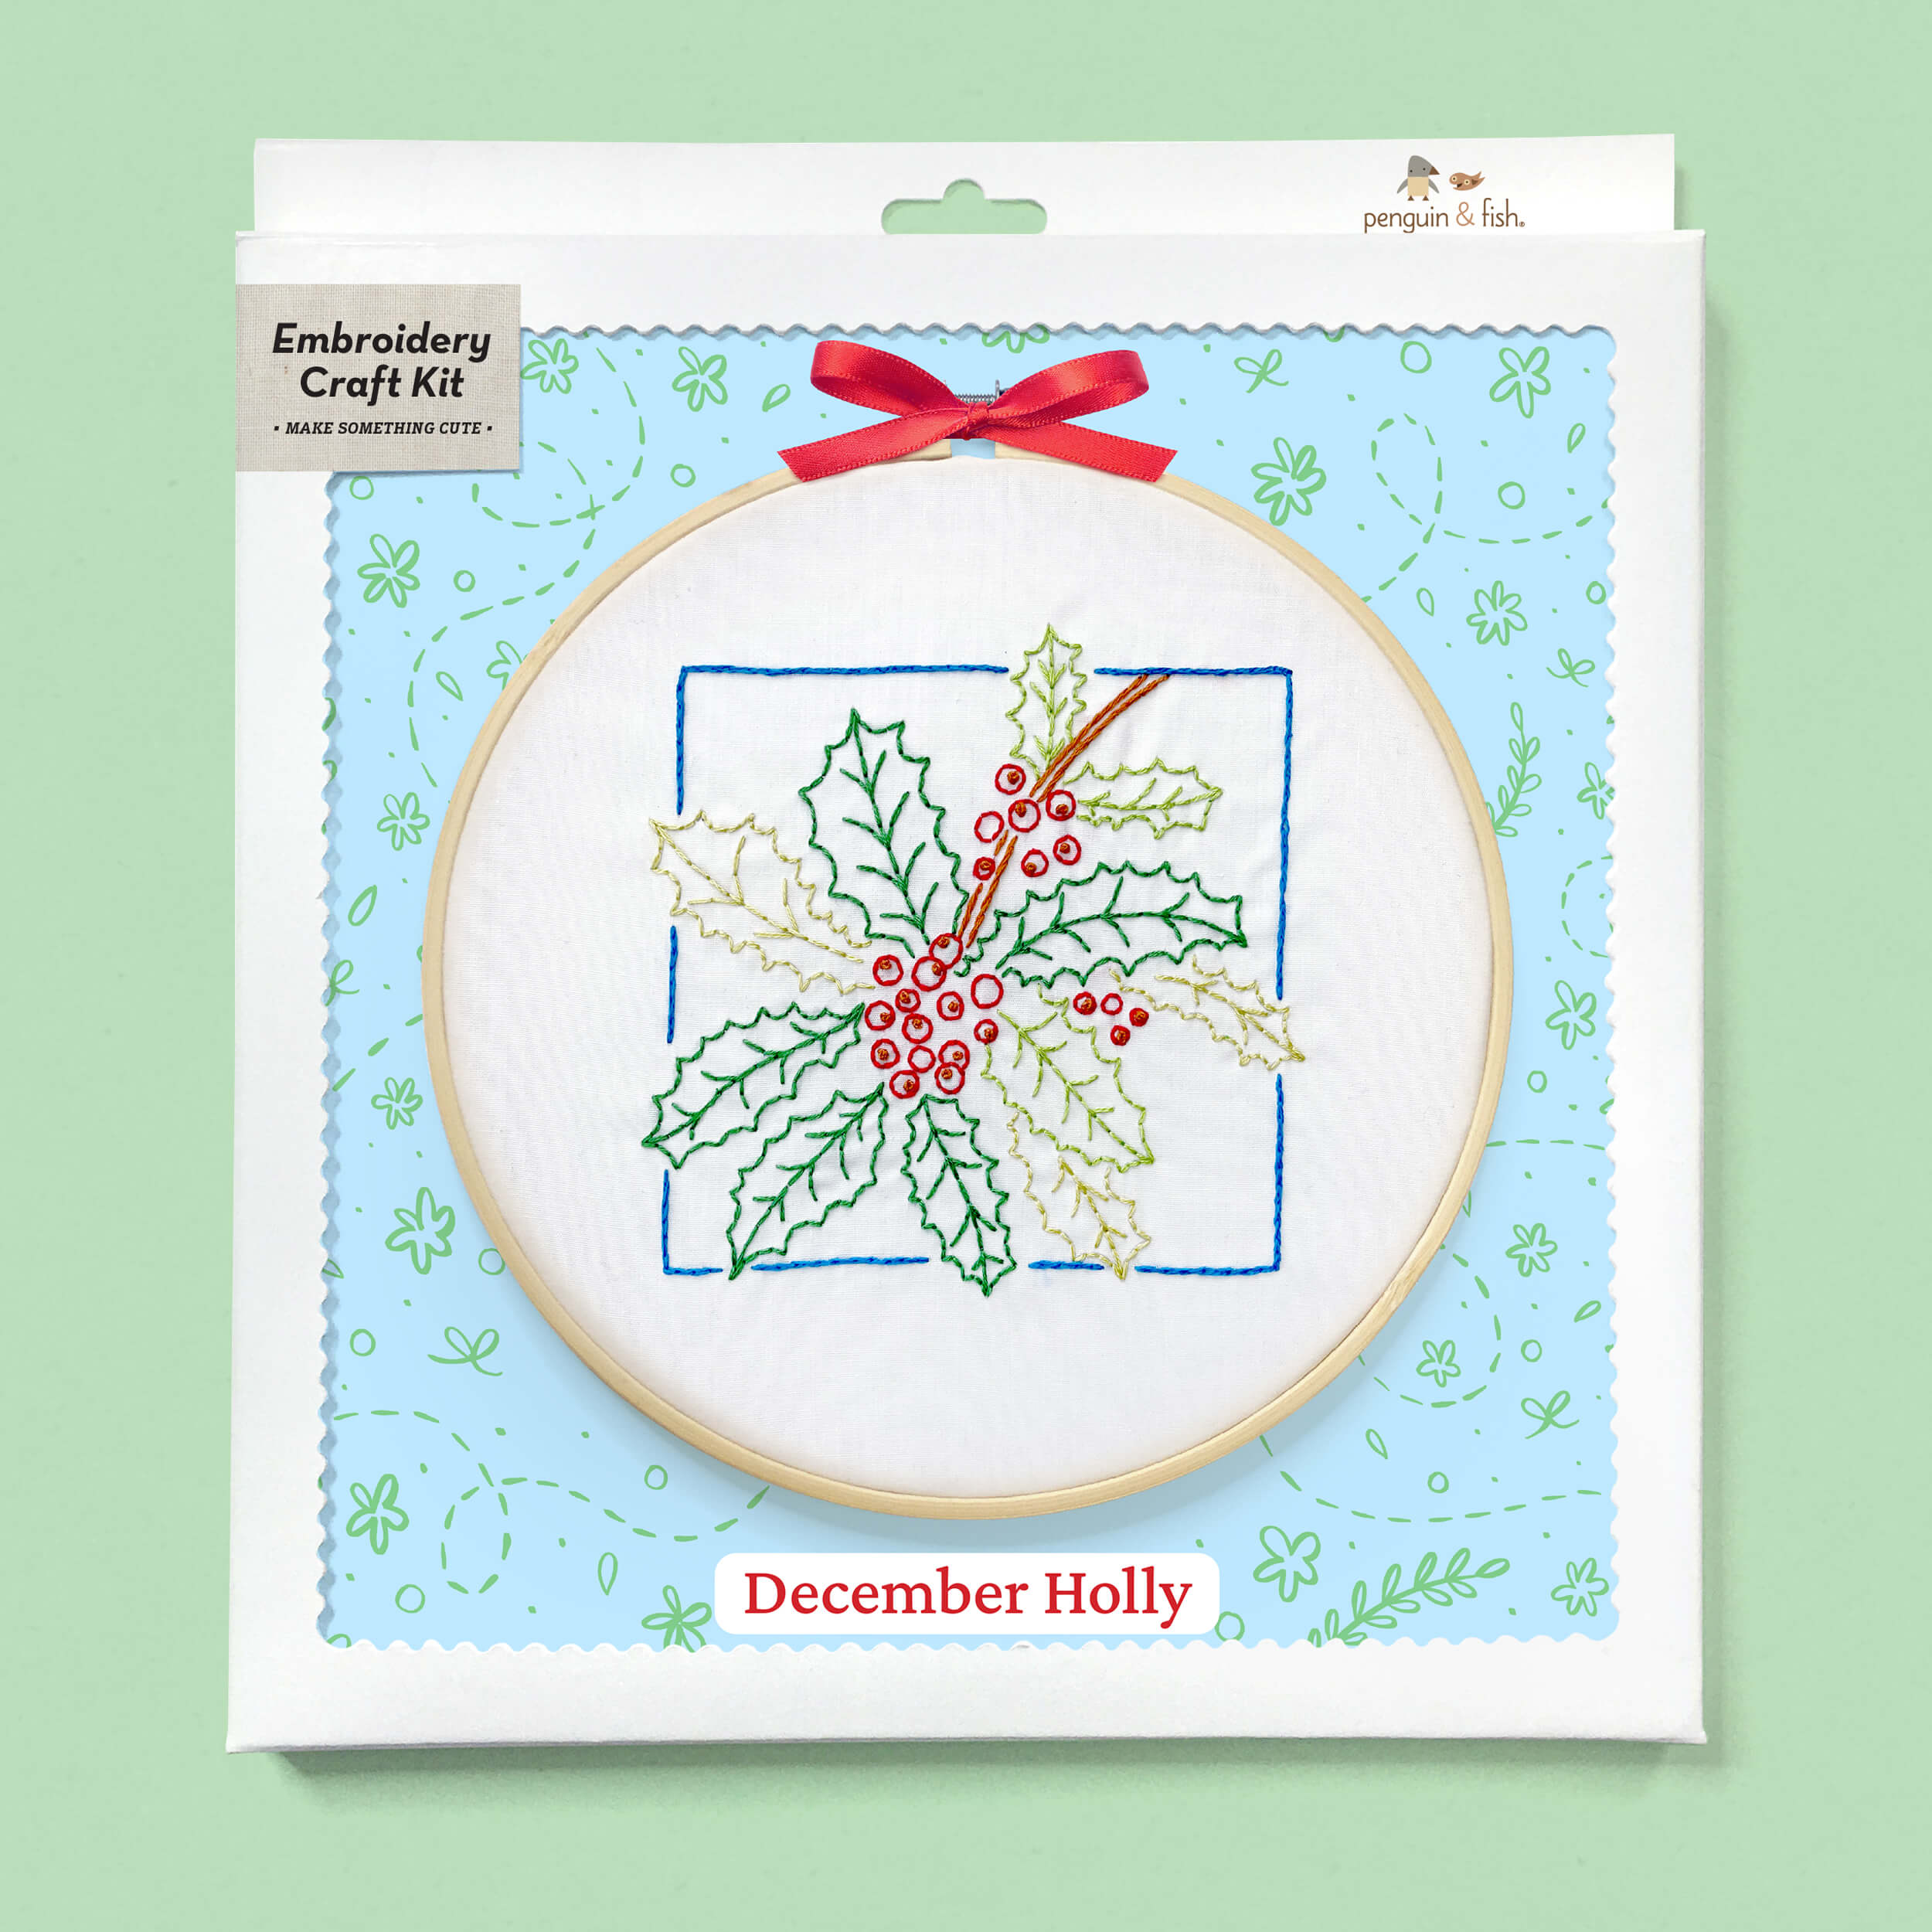 December Holly embroidery kit with supplies in a box